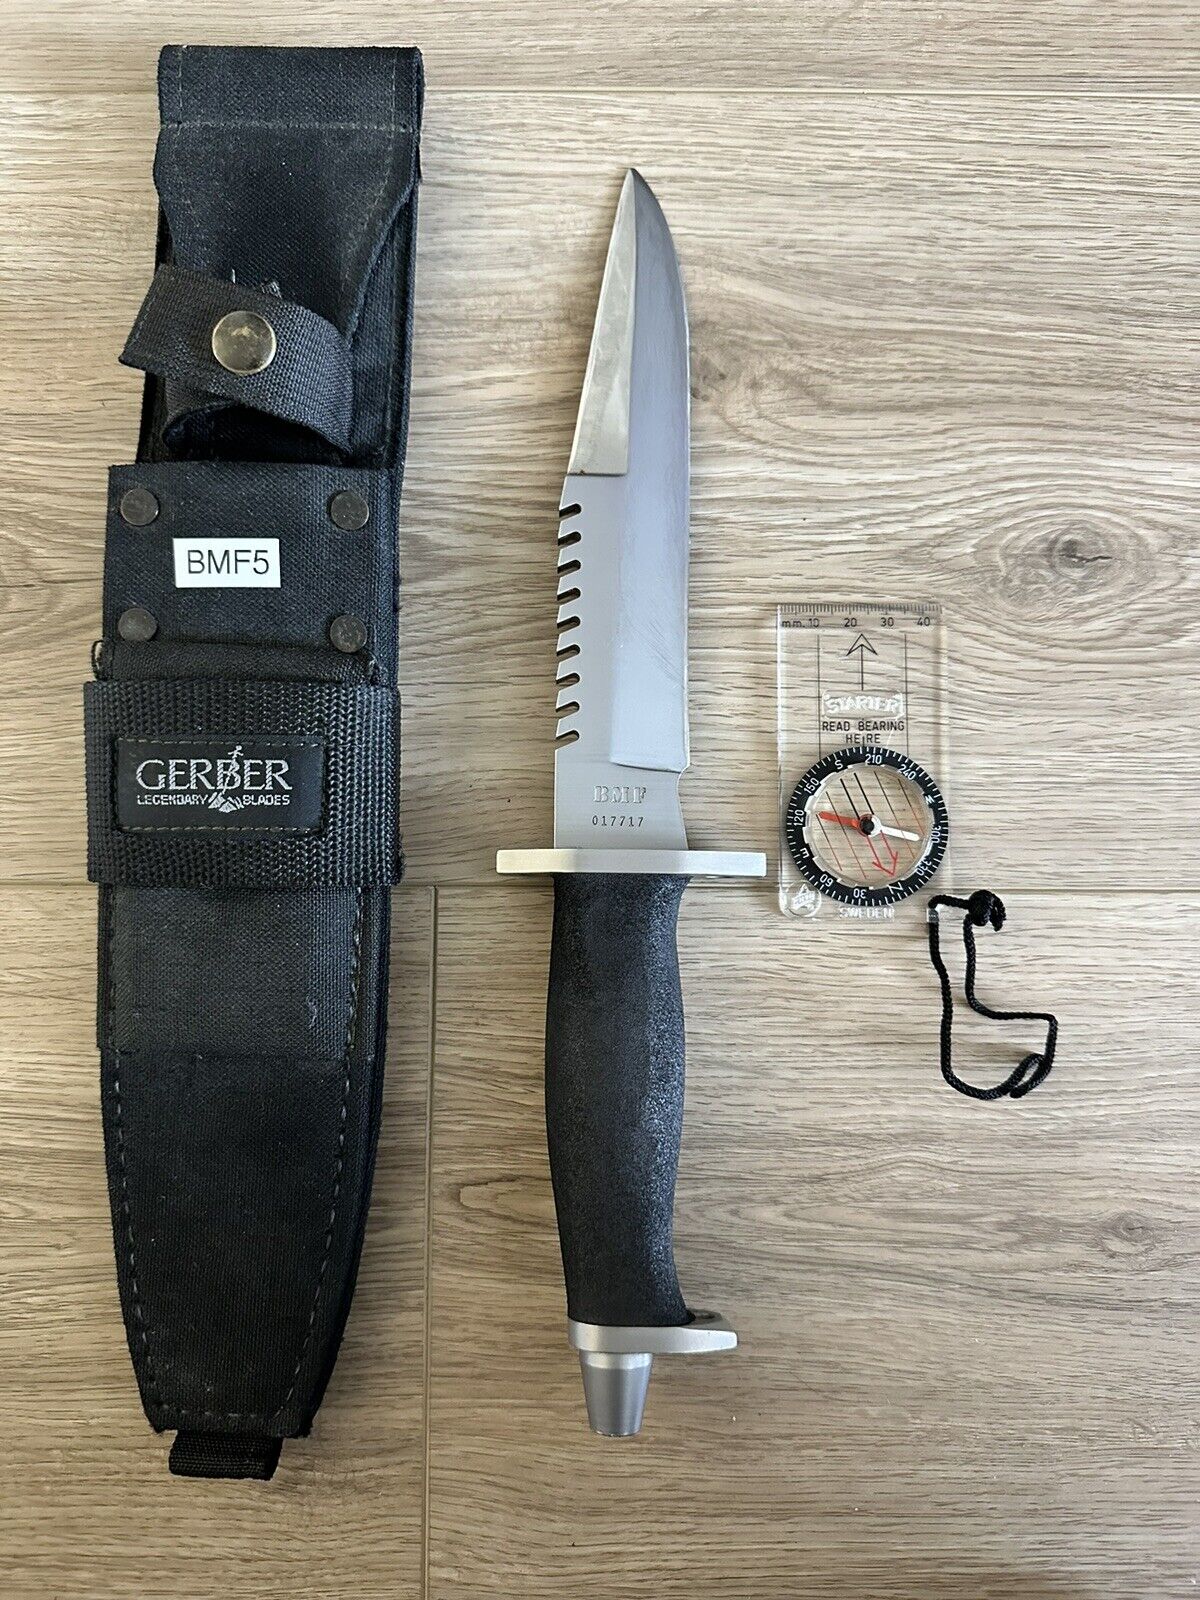 Vintage Gerber BMF Survival Knife With Serrated Saw Teeth, Sheath & Compass